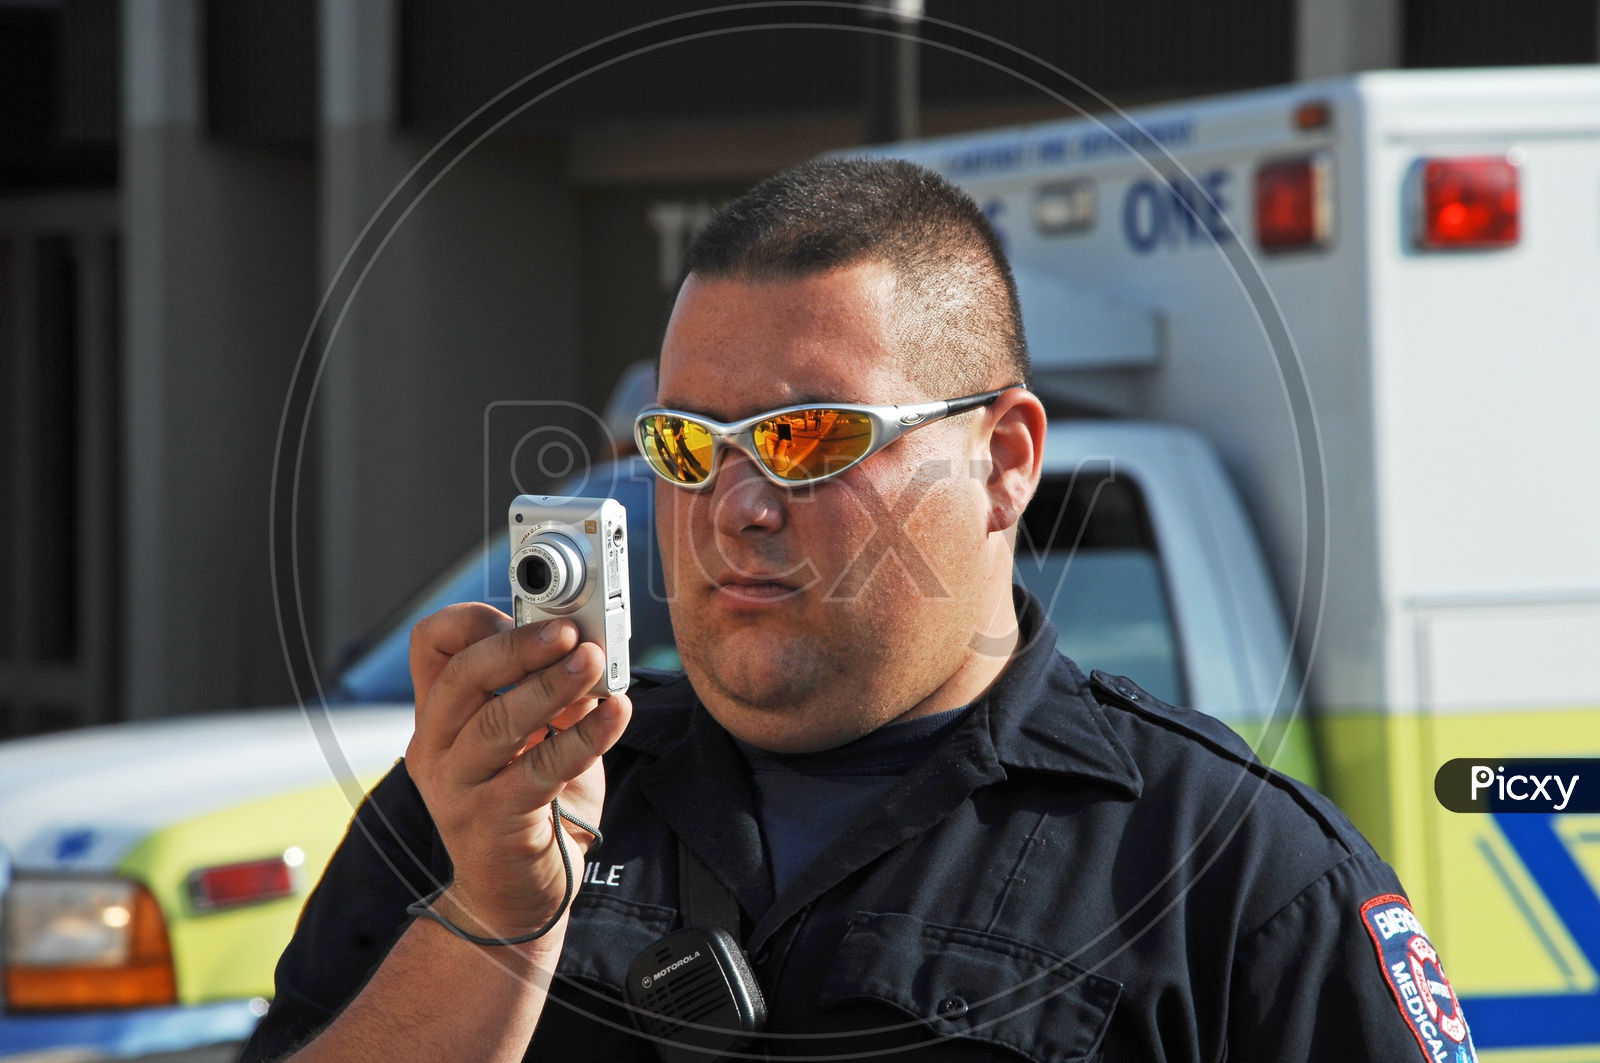 A medical security service man clicking pictures with a camera